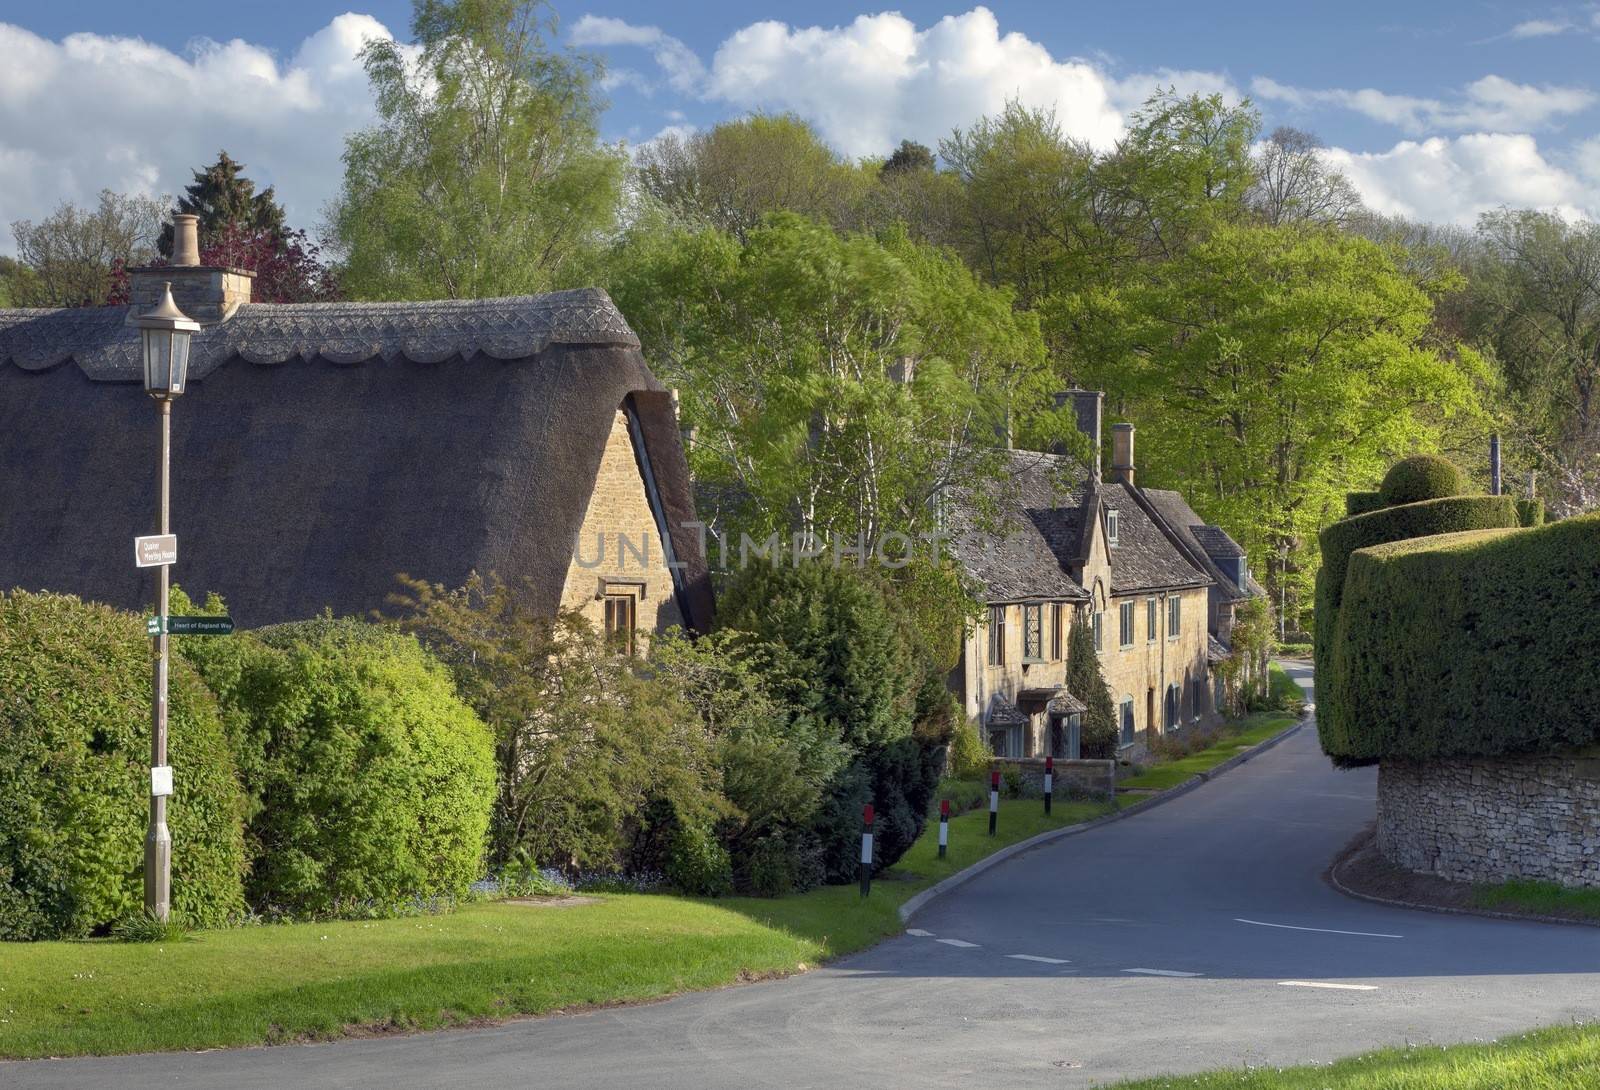 Thatched cottages in the Cotswold village of Broad Campden, Gloucestershire, England.